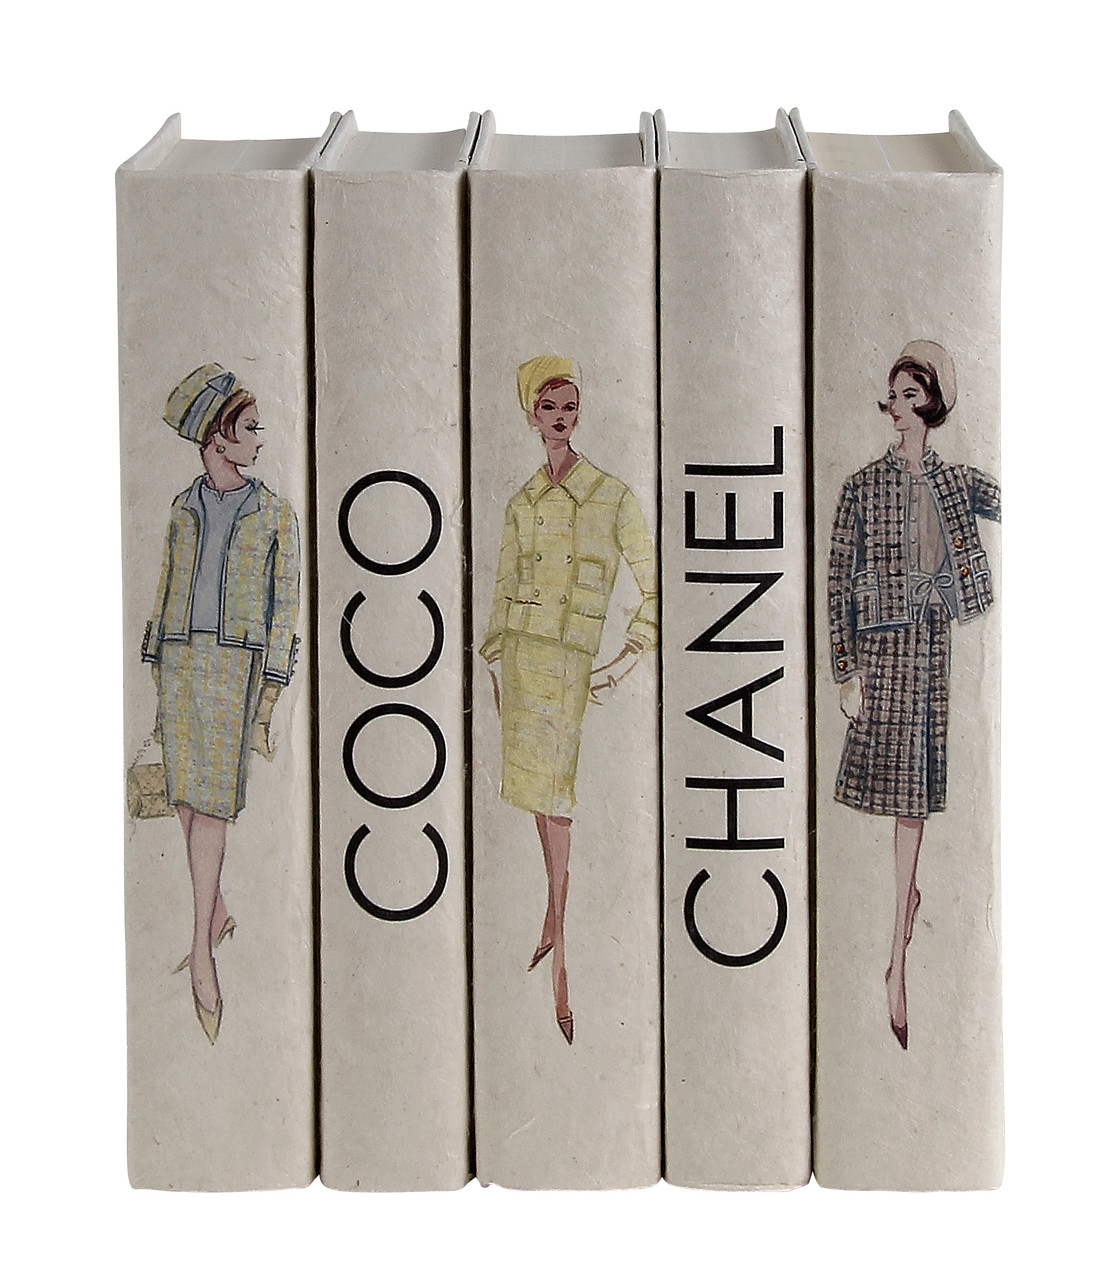 Decorative books with vintage Coco Chanel art